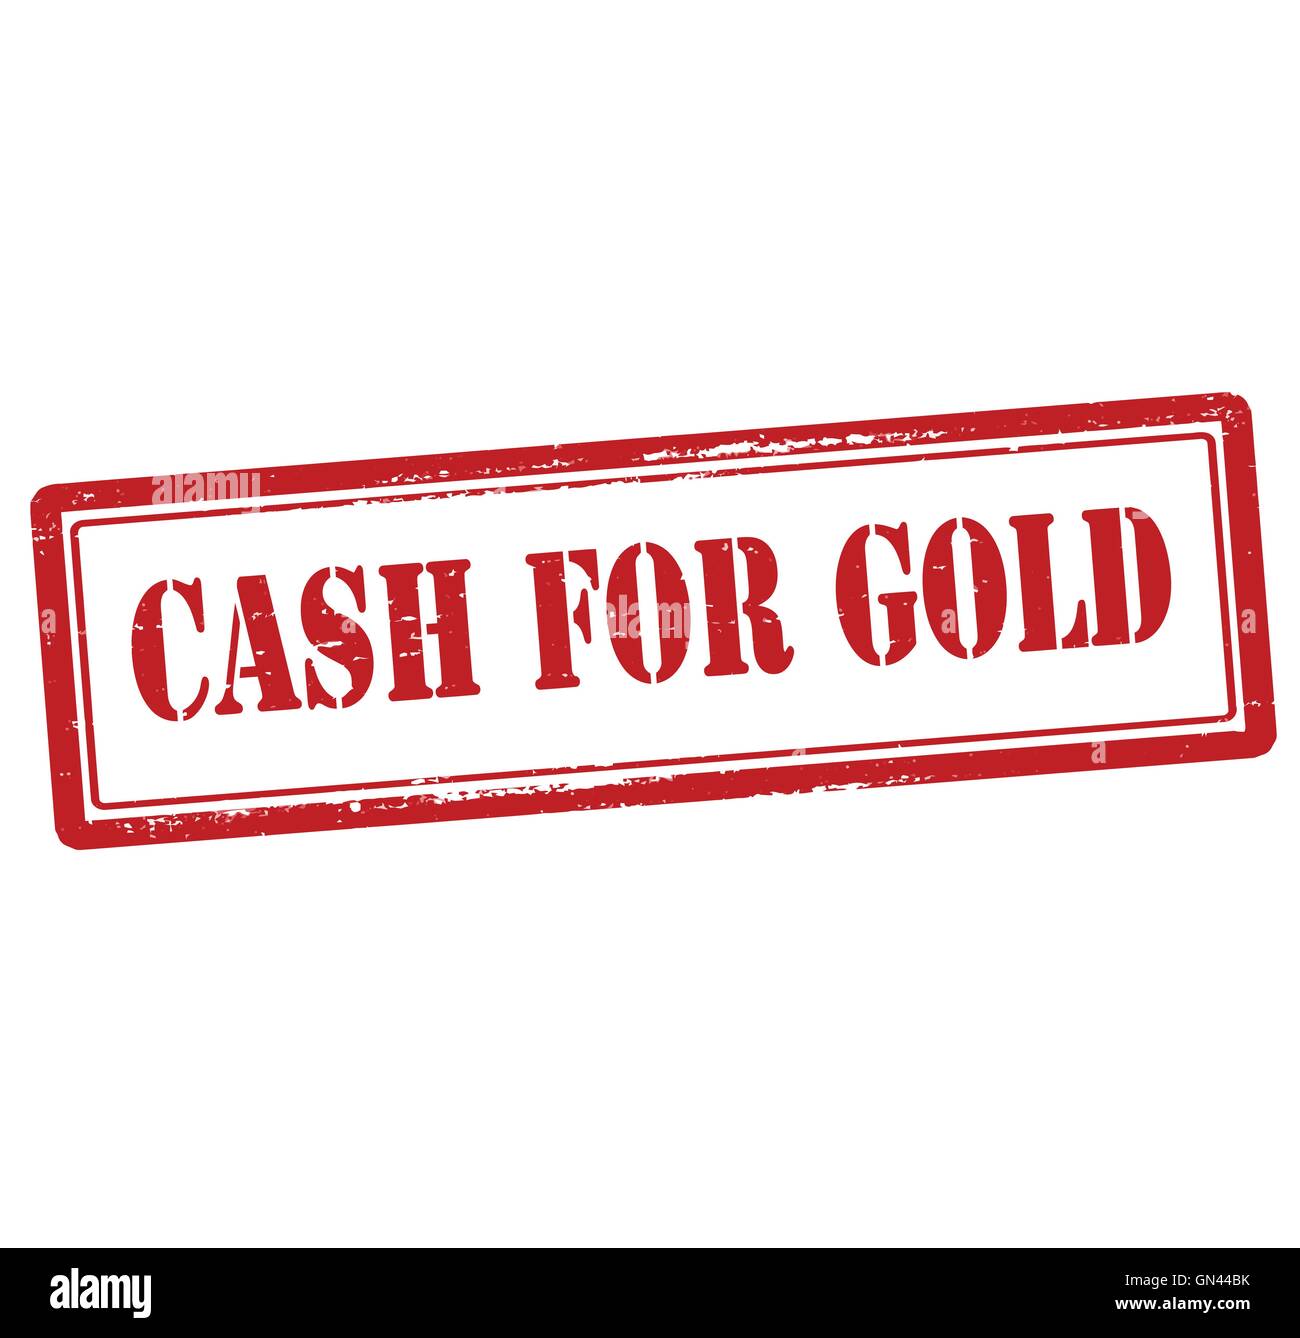 Cash for gold Stock Vector